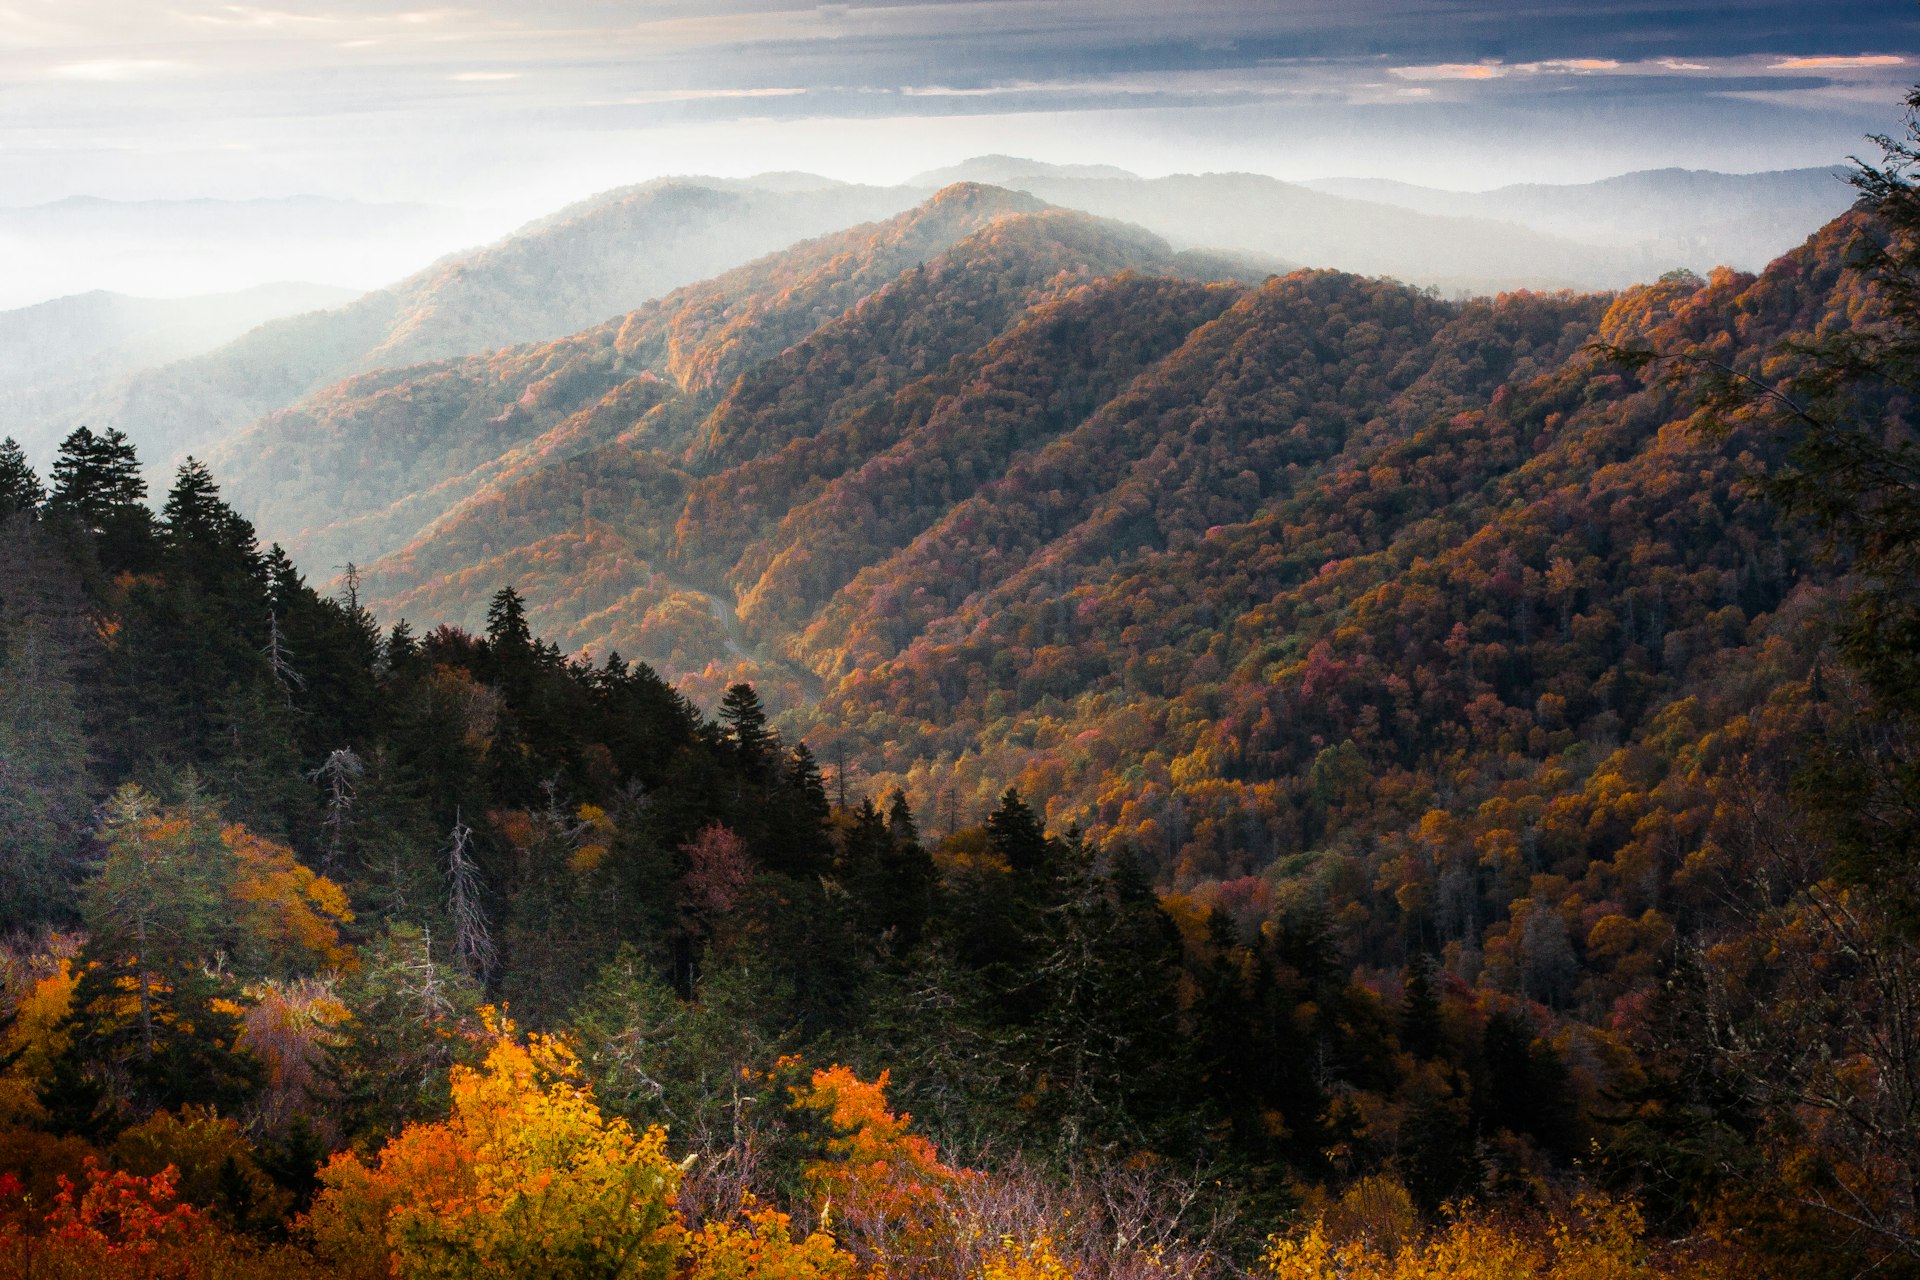 A view of the sun rising between mountains in the Smoky Mountains, USA. The mountains are covered in thick forest.